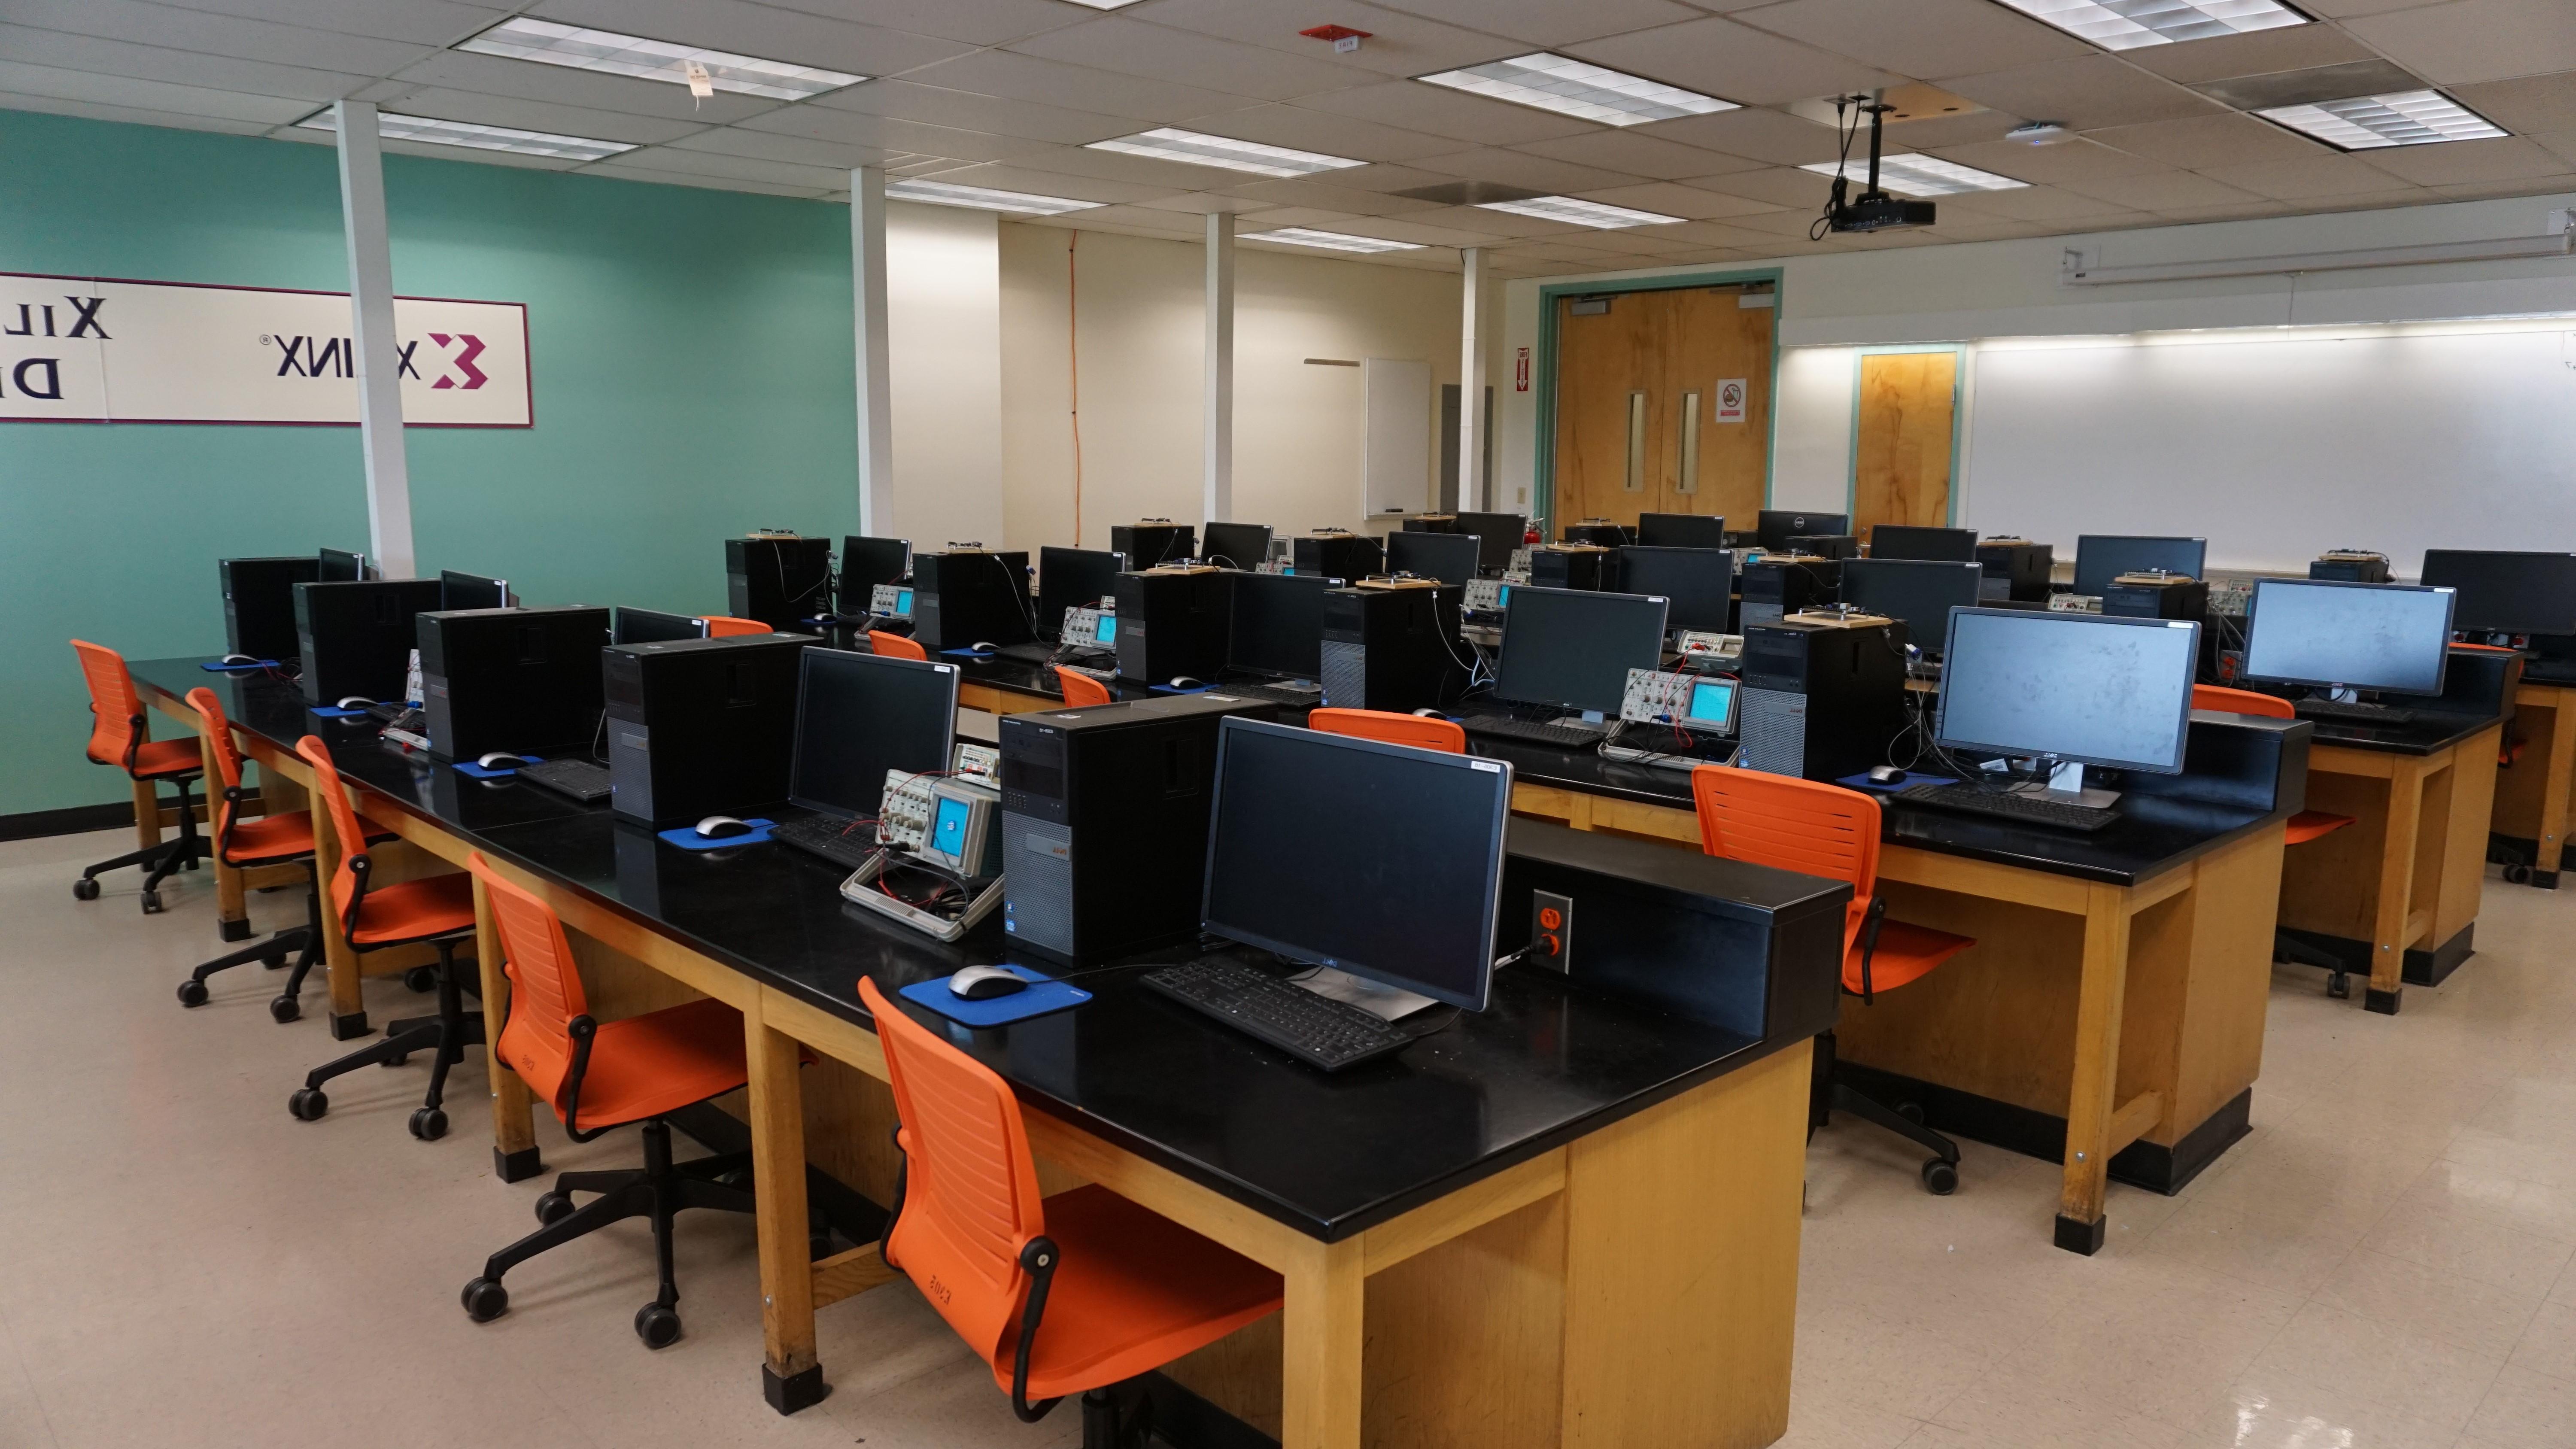 A classroom with computers, orange chairs, and a bright teal wall with the Xilinx logo.